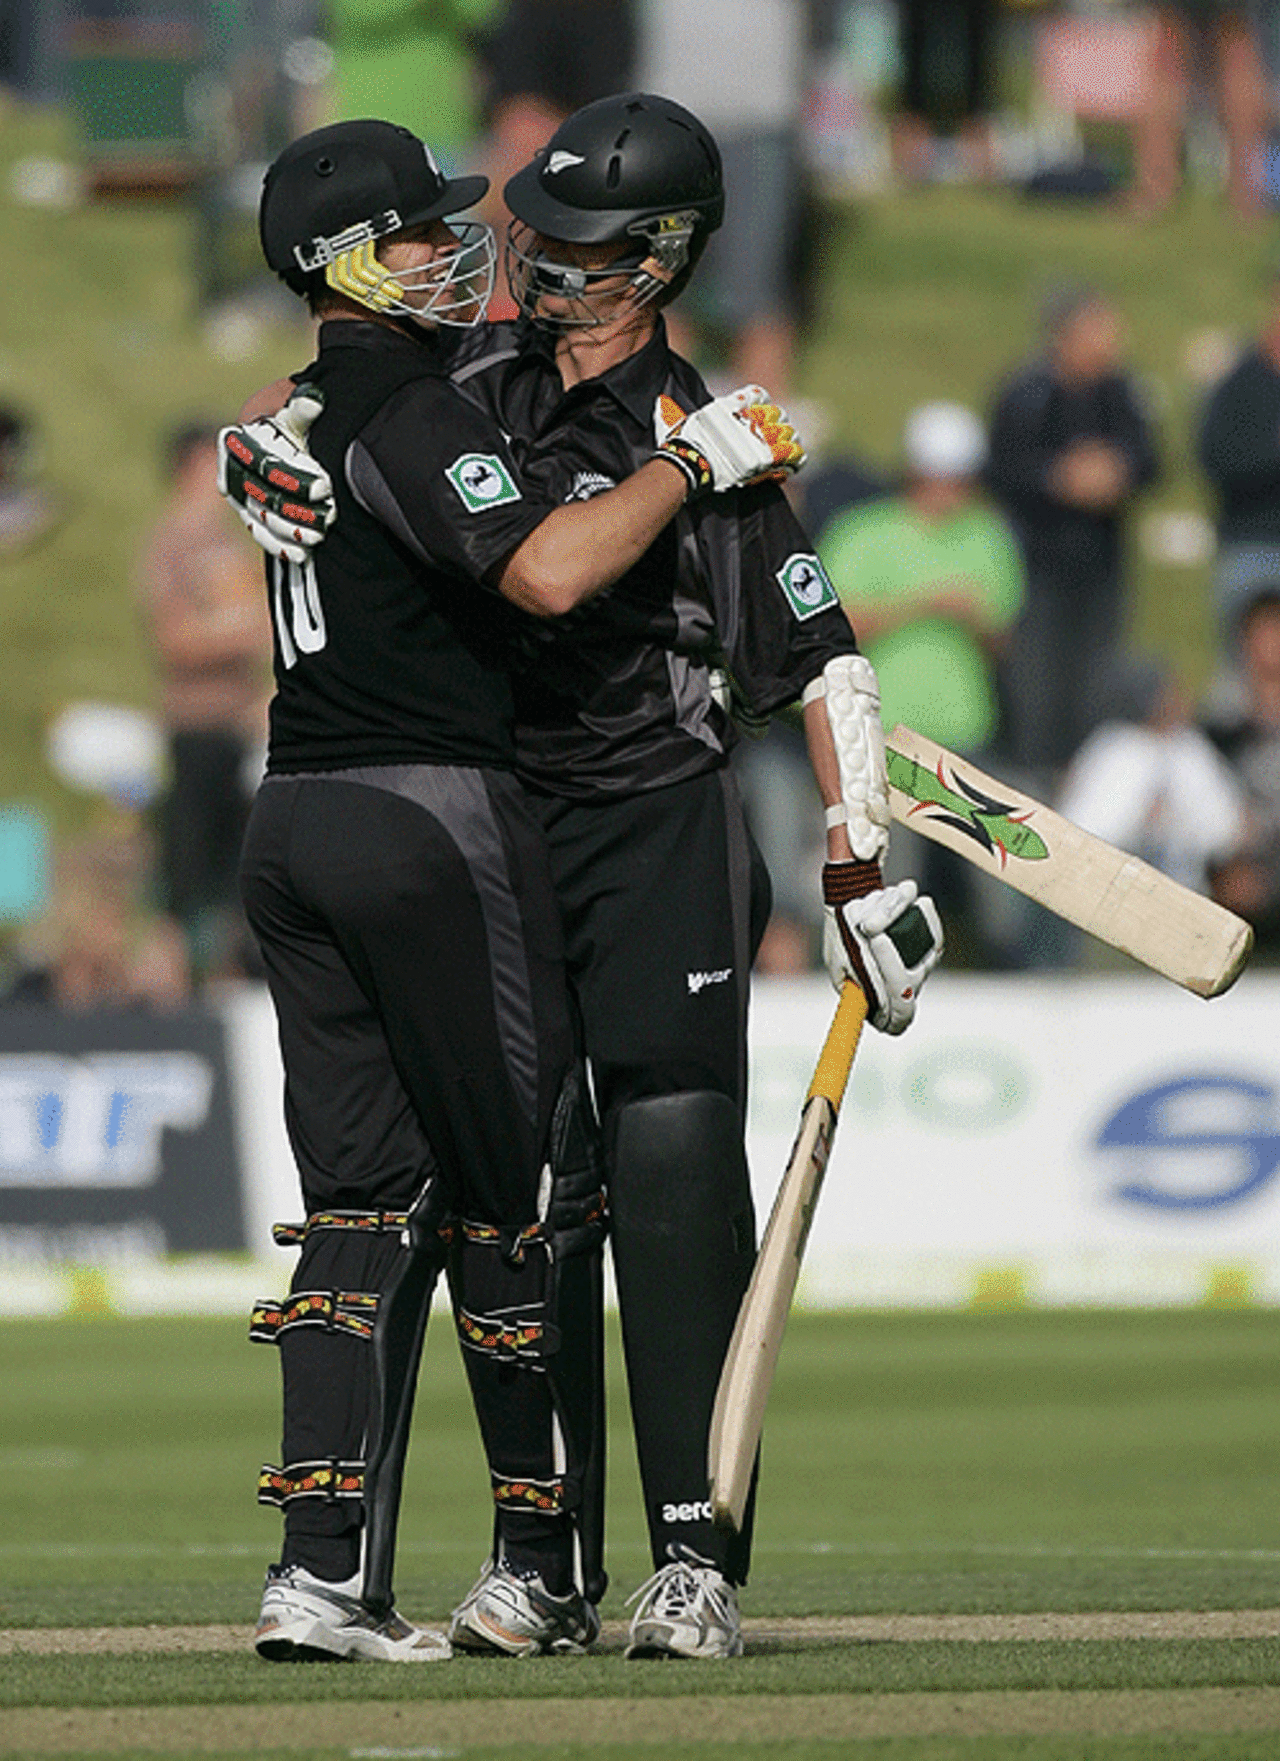 Brothers in arms: James Franklin and Michael Mason celebrate a last-ball win, New Zealand v Sri Lanka, 2nd ODI, Queenstown, December 31, 2006